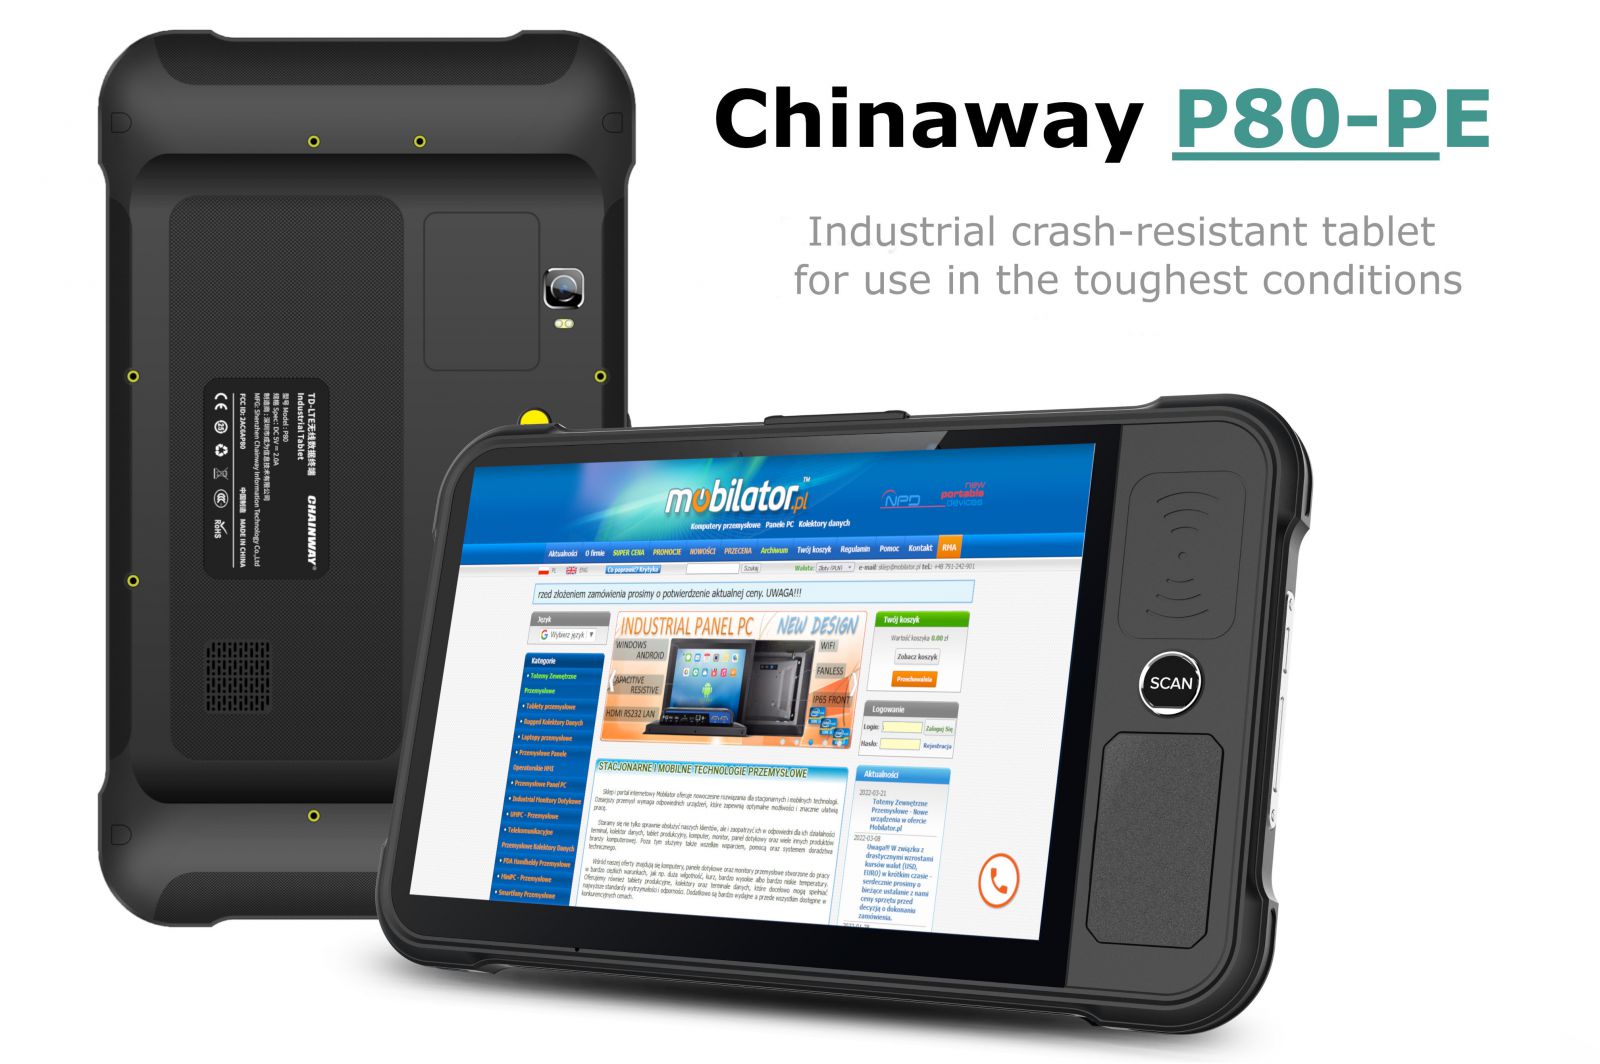 Chainway P80-PE v. 5- Robust tablet with Gorilla Glass protection, 13Mpx rear camera and 5Mpx front, UHF RFID front (30-100cm range)